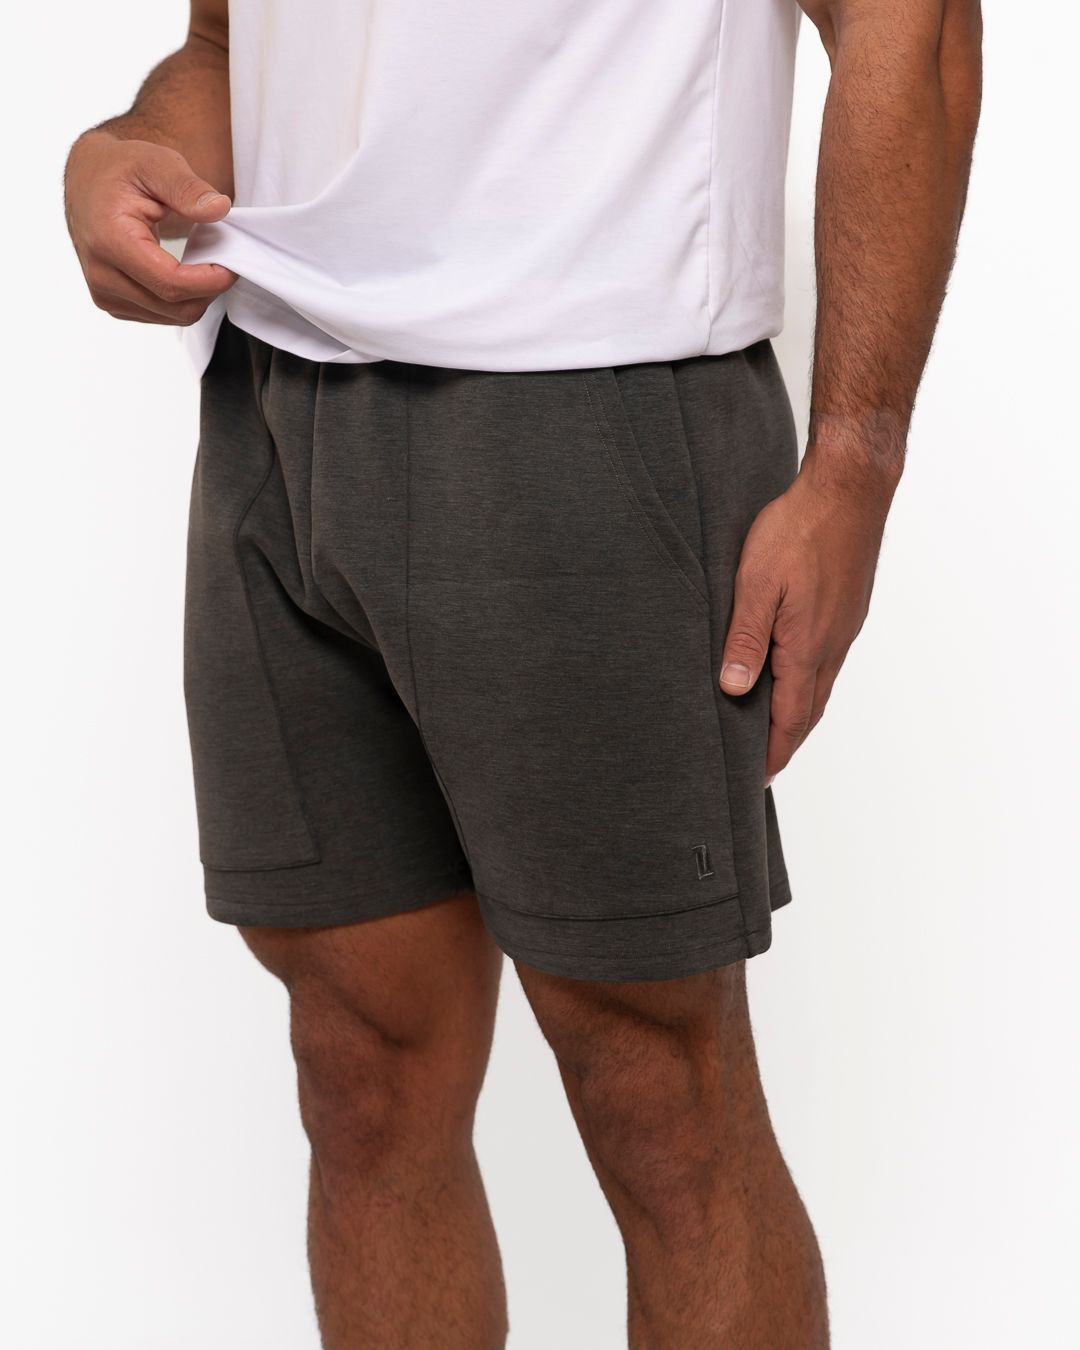 MEN'S On-The-Go Short (SoftMotion Fabric) - The Sydney Adams Collection